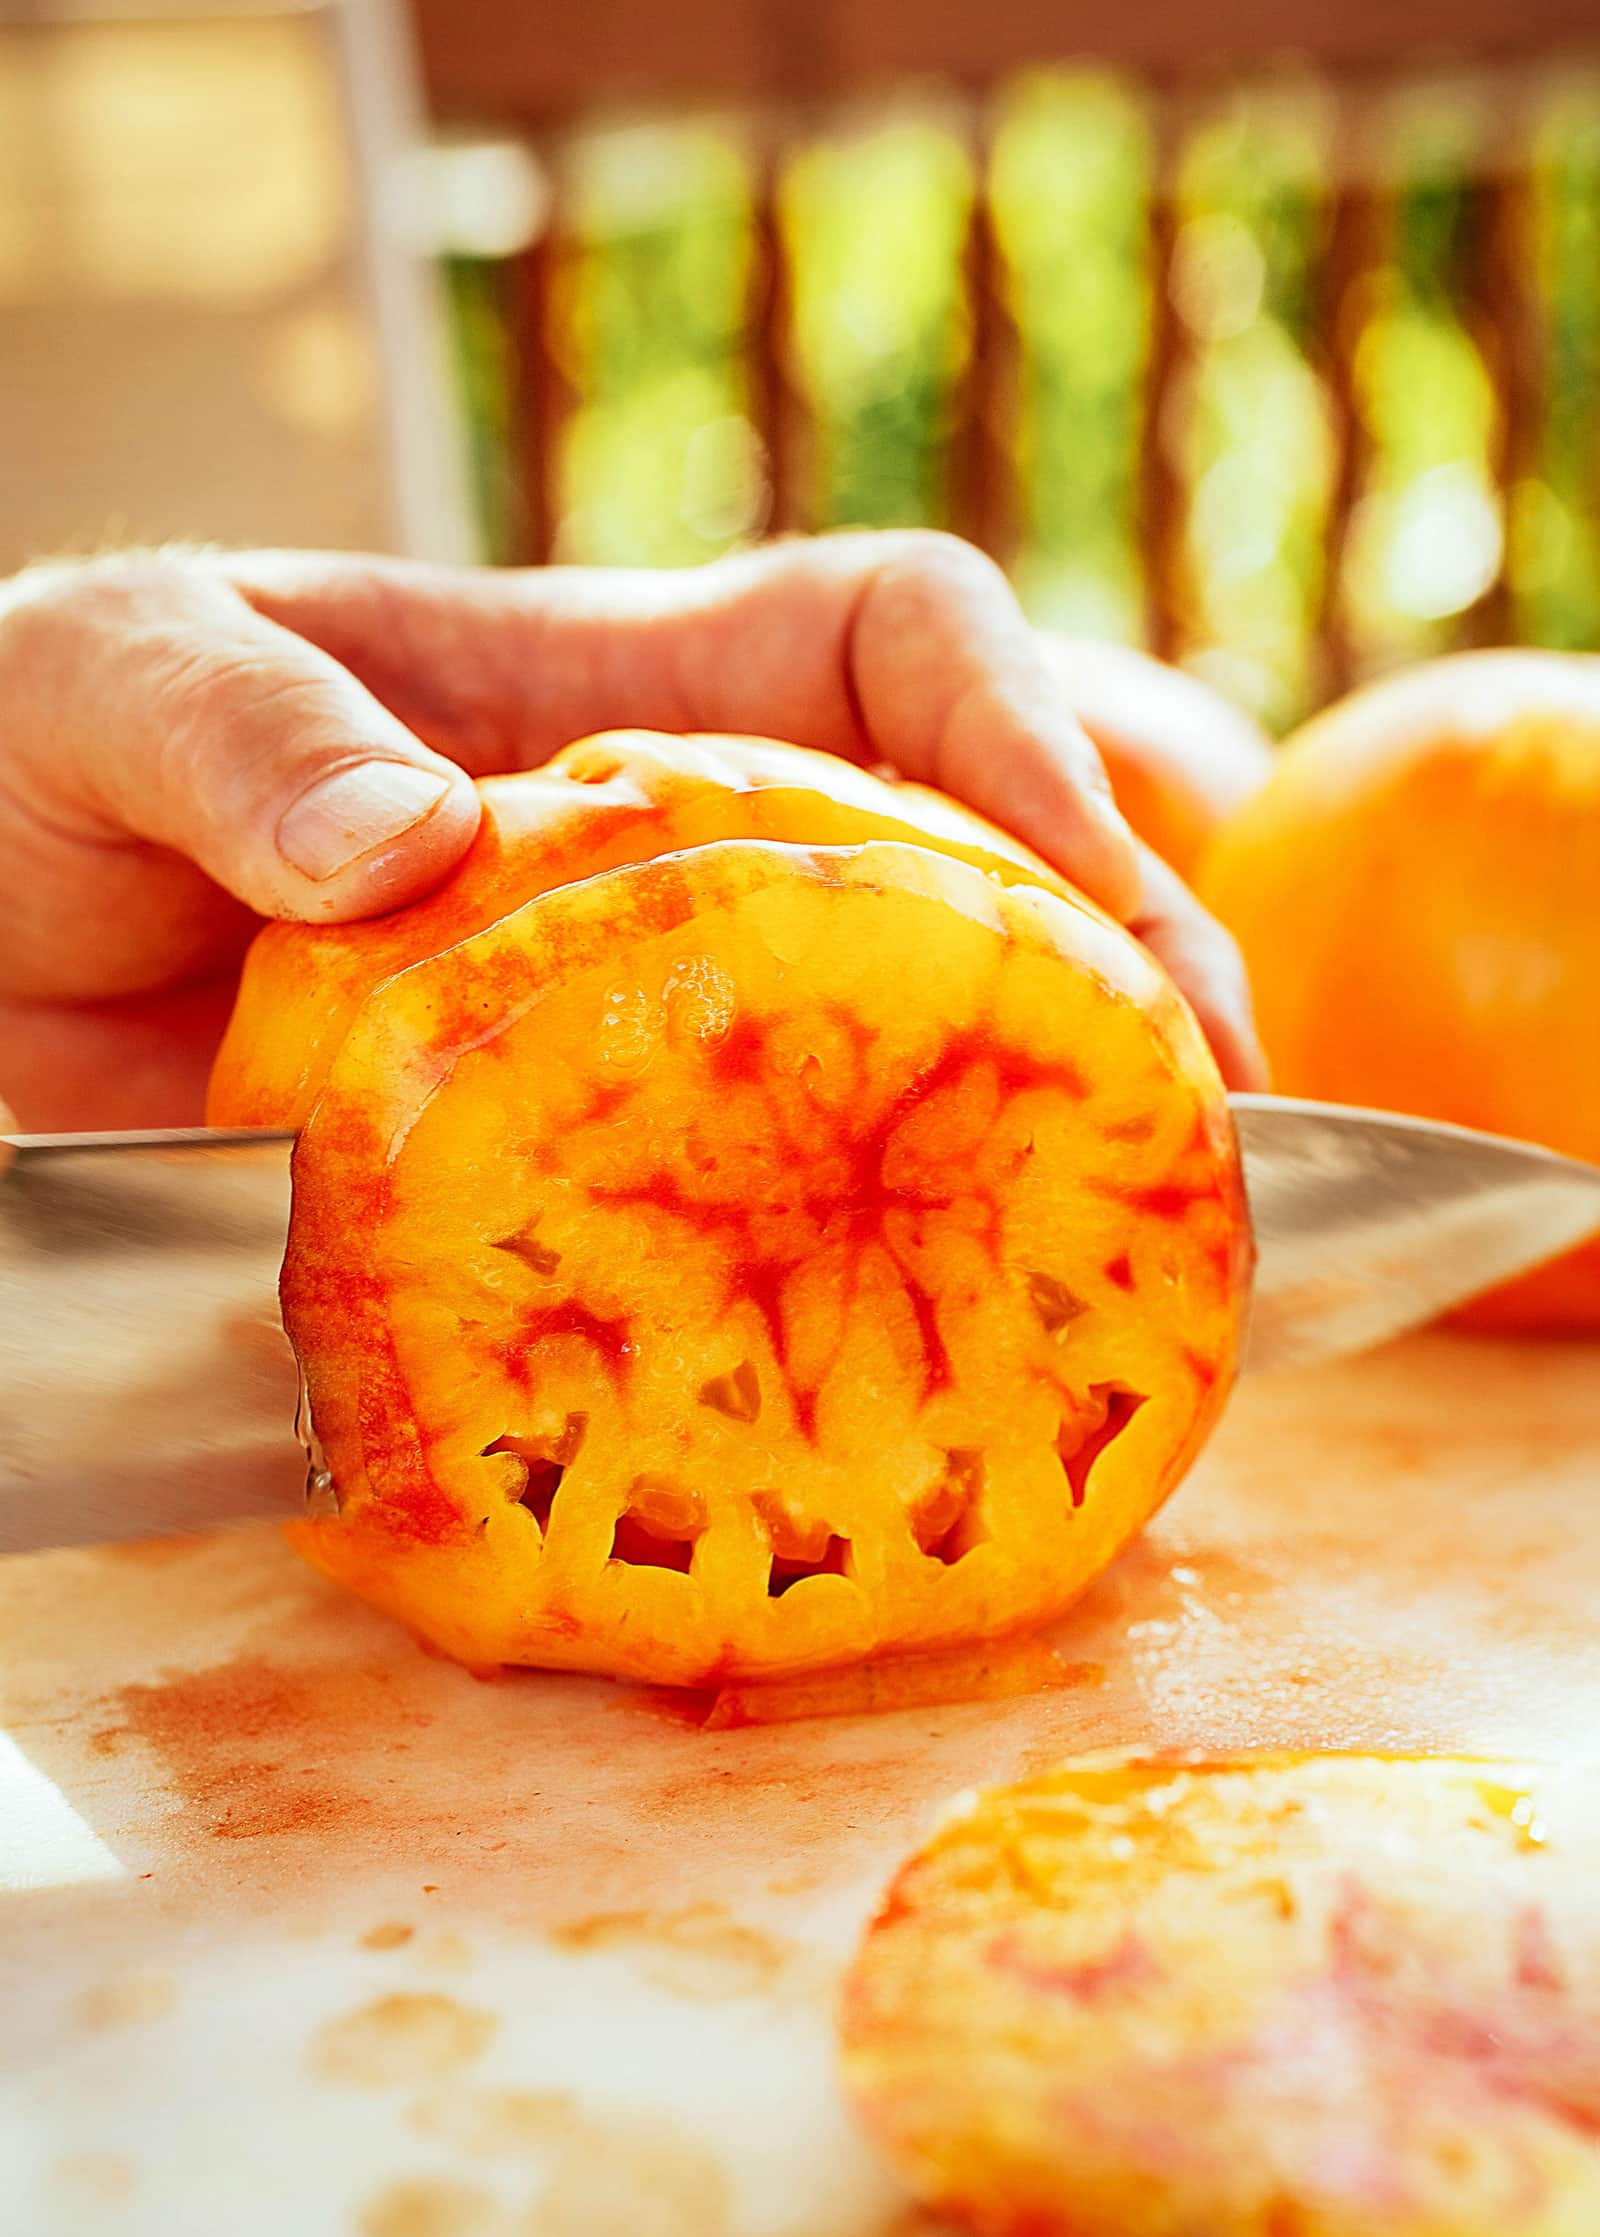 Knife slicing into a big juicy orange and red heirloom tomato on a cutting board